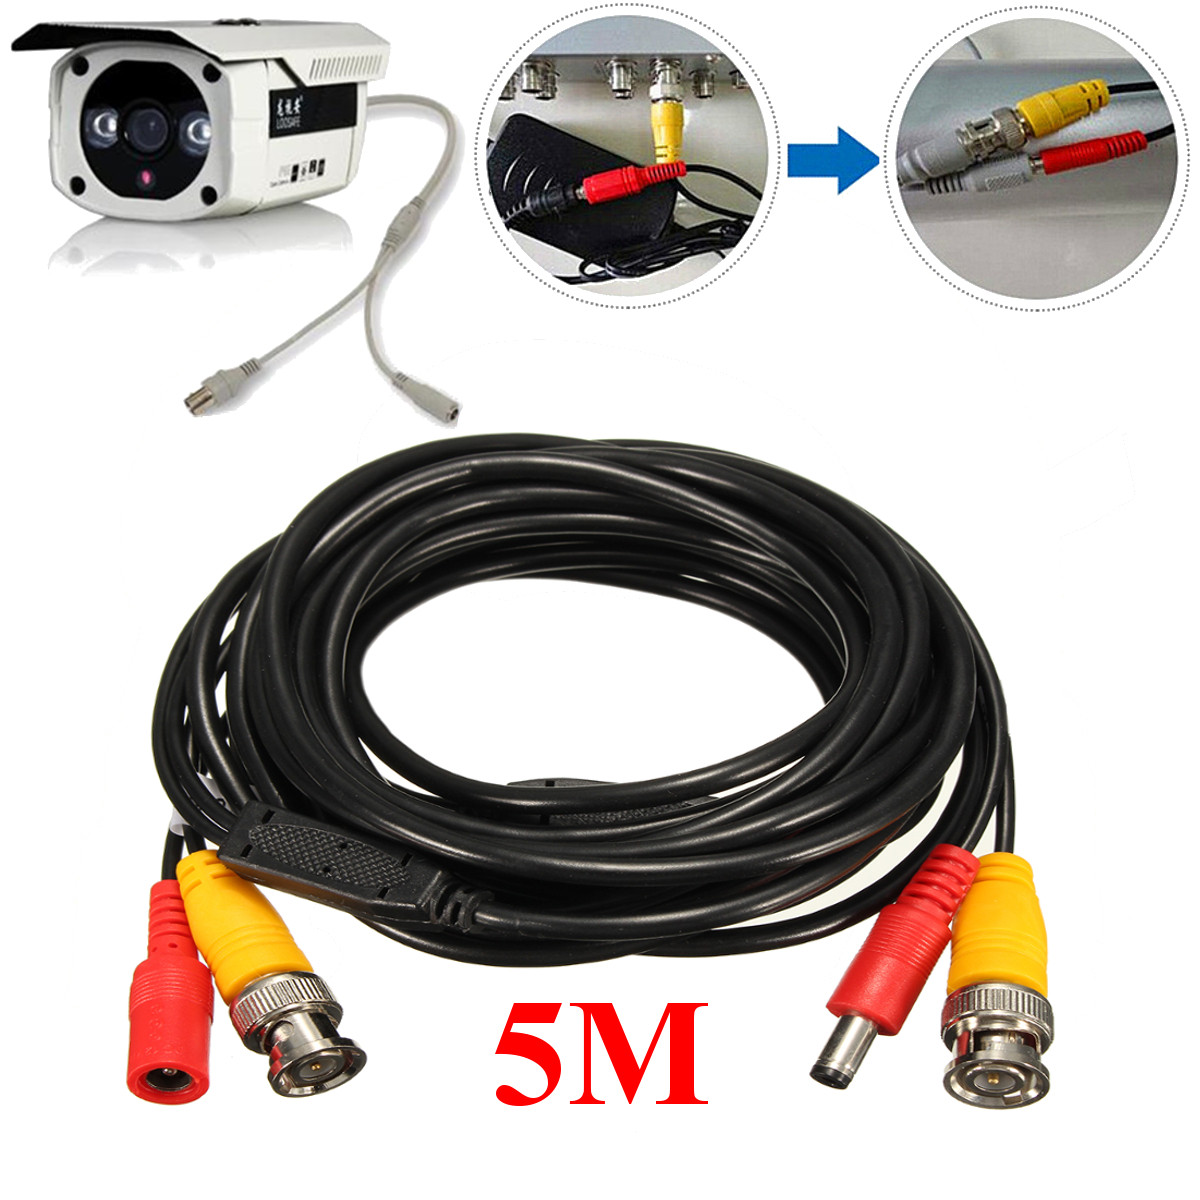 

5M 2-in-1 Audio Video Power Cable CCD Security Camera BNC RCA CCTV DVR Wire Cord